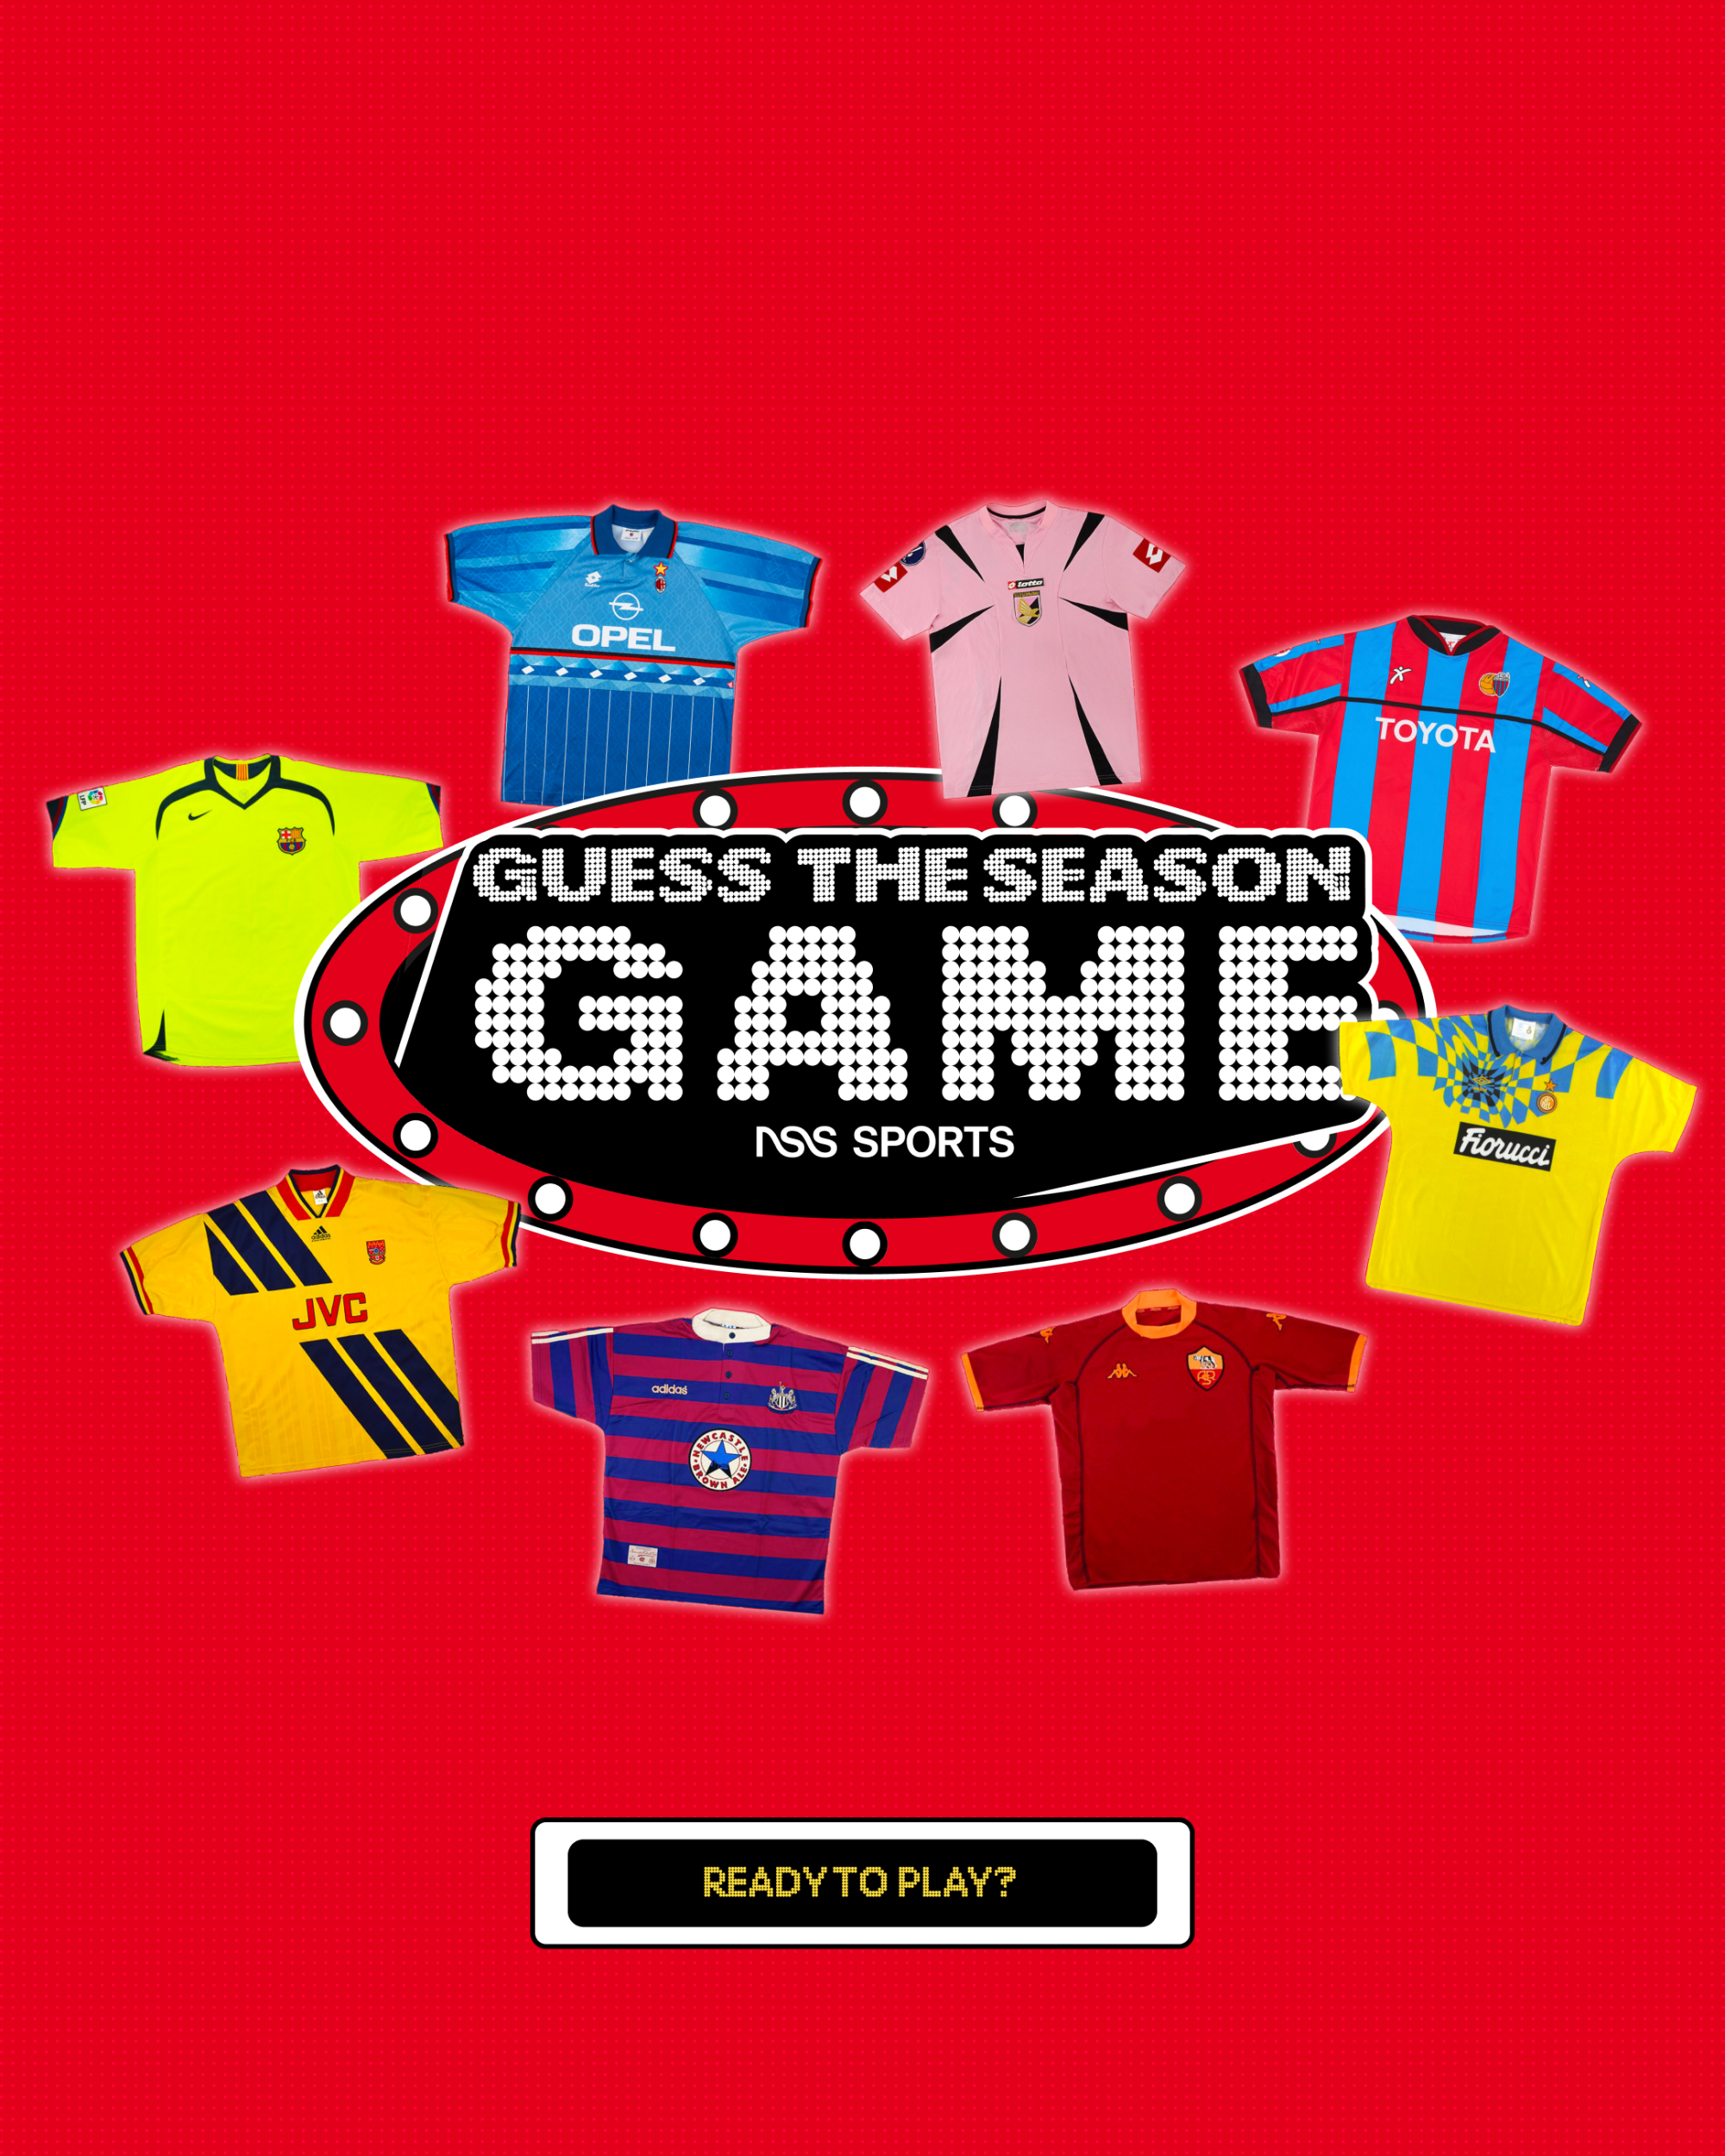 Play Guess The Season, the first nss sports videogame How well do you know football shirts?